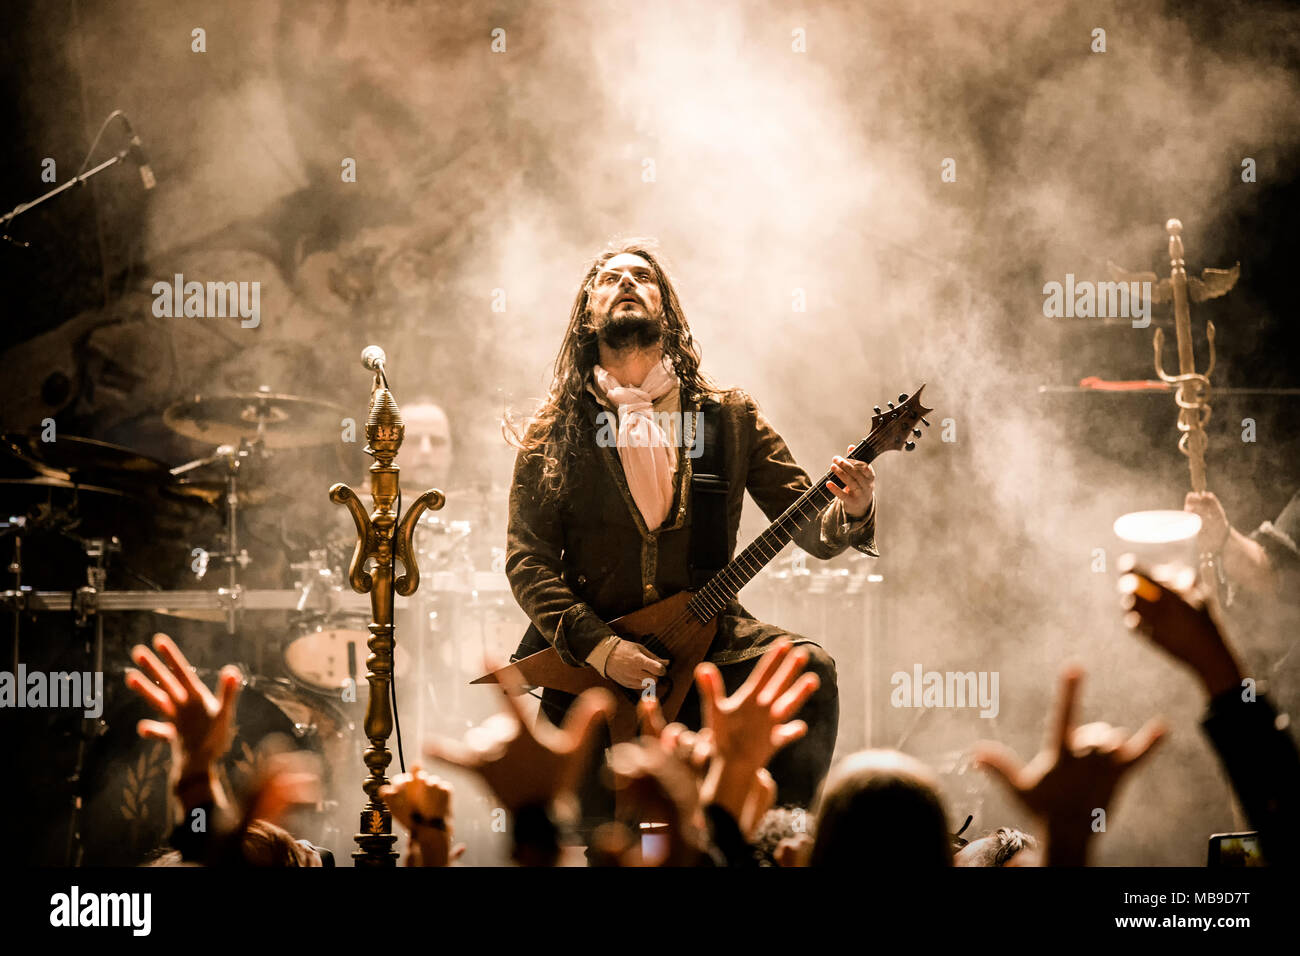 Norway, Oslo - March 31, 2018. The Italian death metal band Fleshgod Apocalypse performs a live concert at Rockefeller during the Norwegian metal festival Inferno Metal Festival 2018 in Oslo. Here guitarist Cristiano Trionfera is seen live on stage. (Photo credit: Gonzales Photo - Terje Dokken). Stock Photo